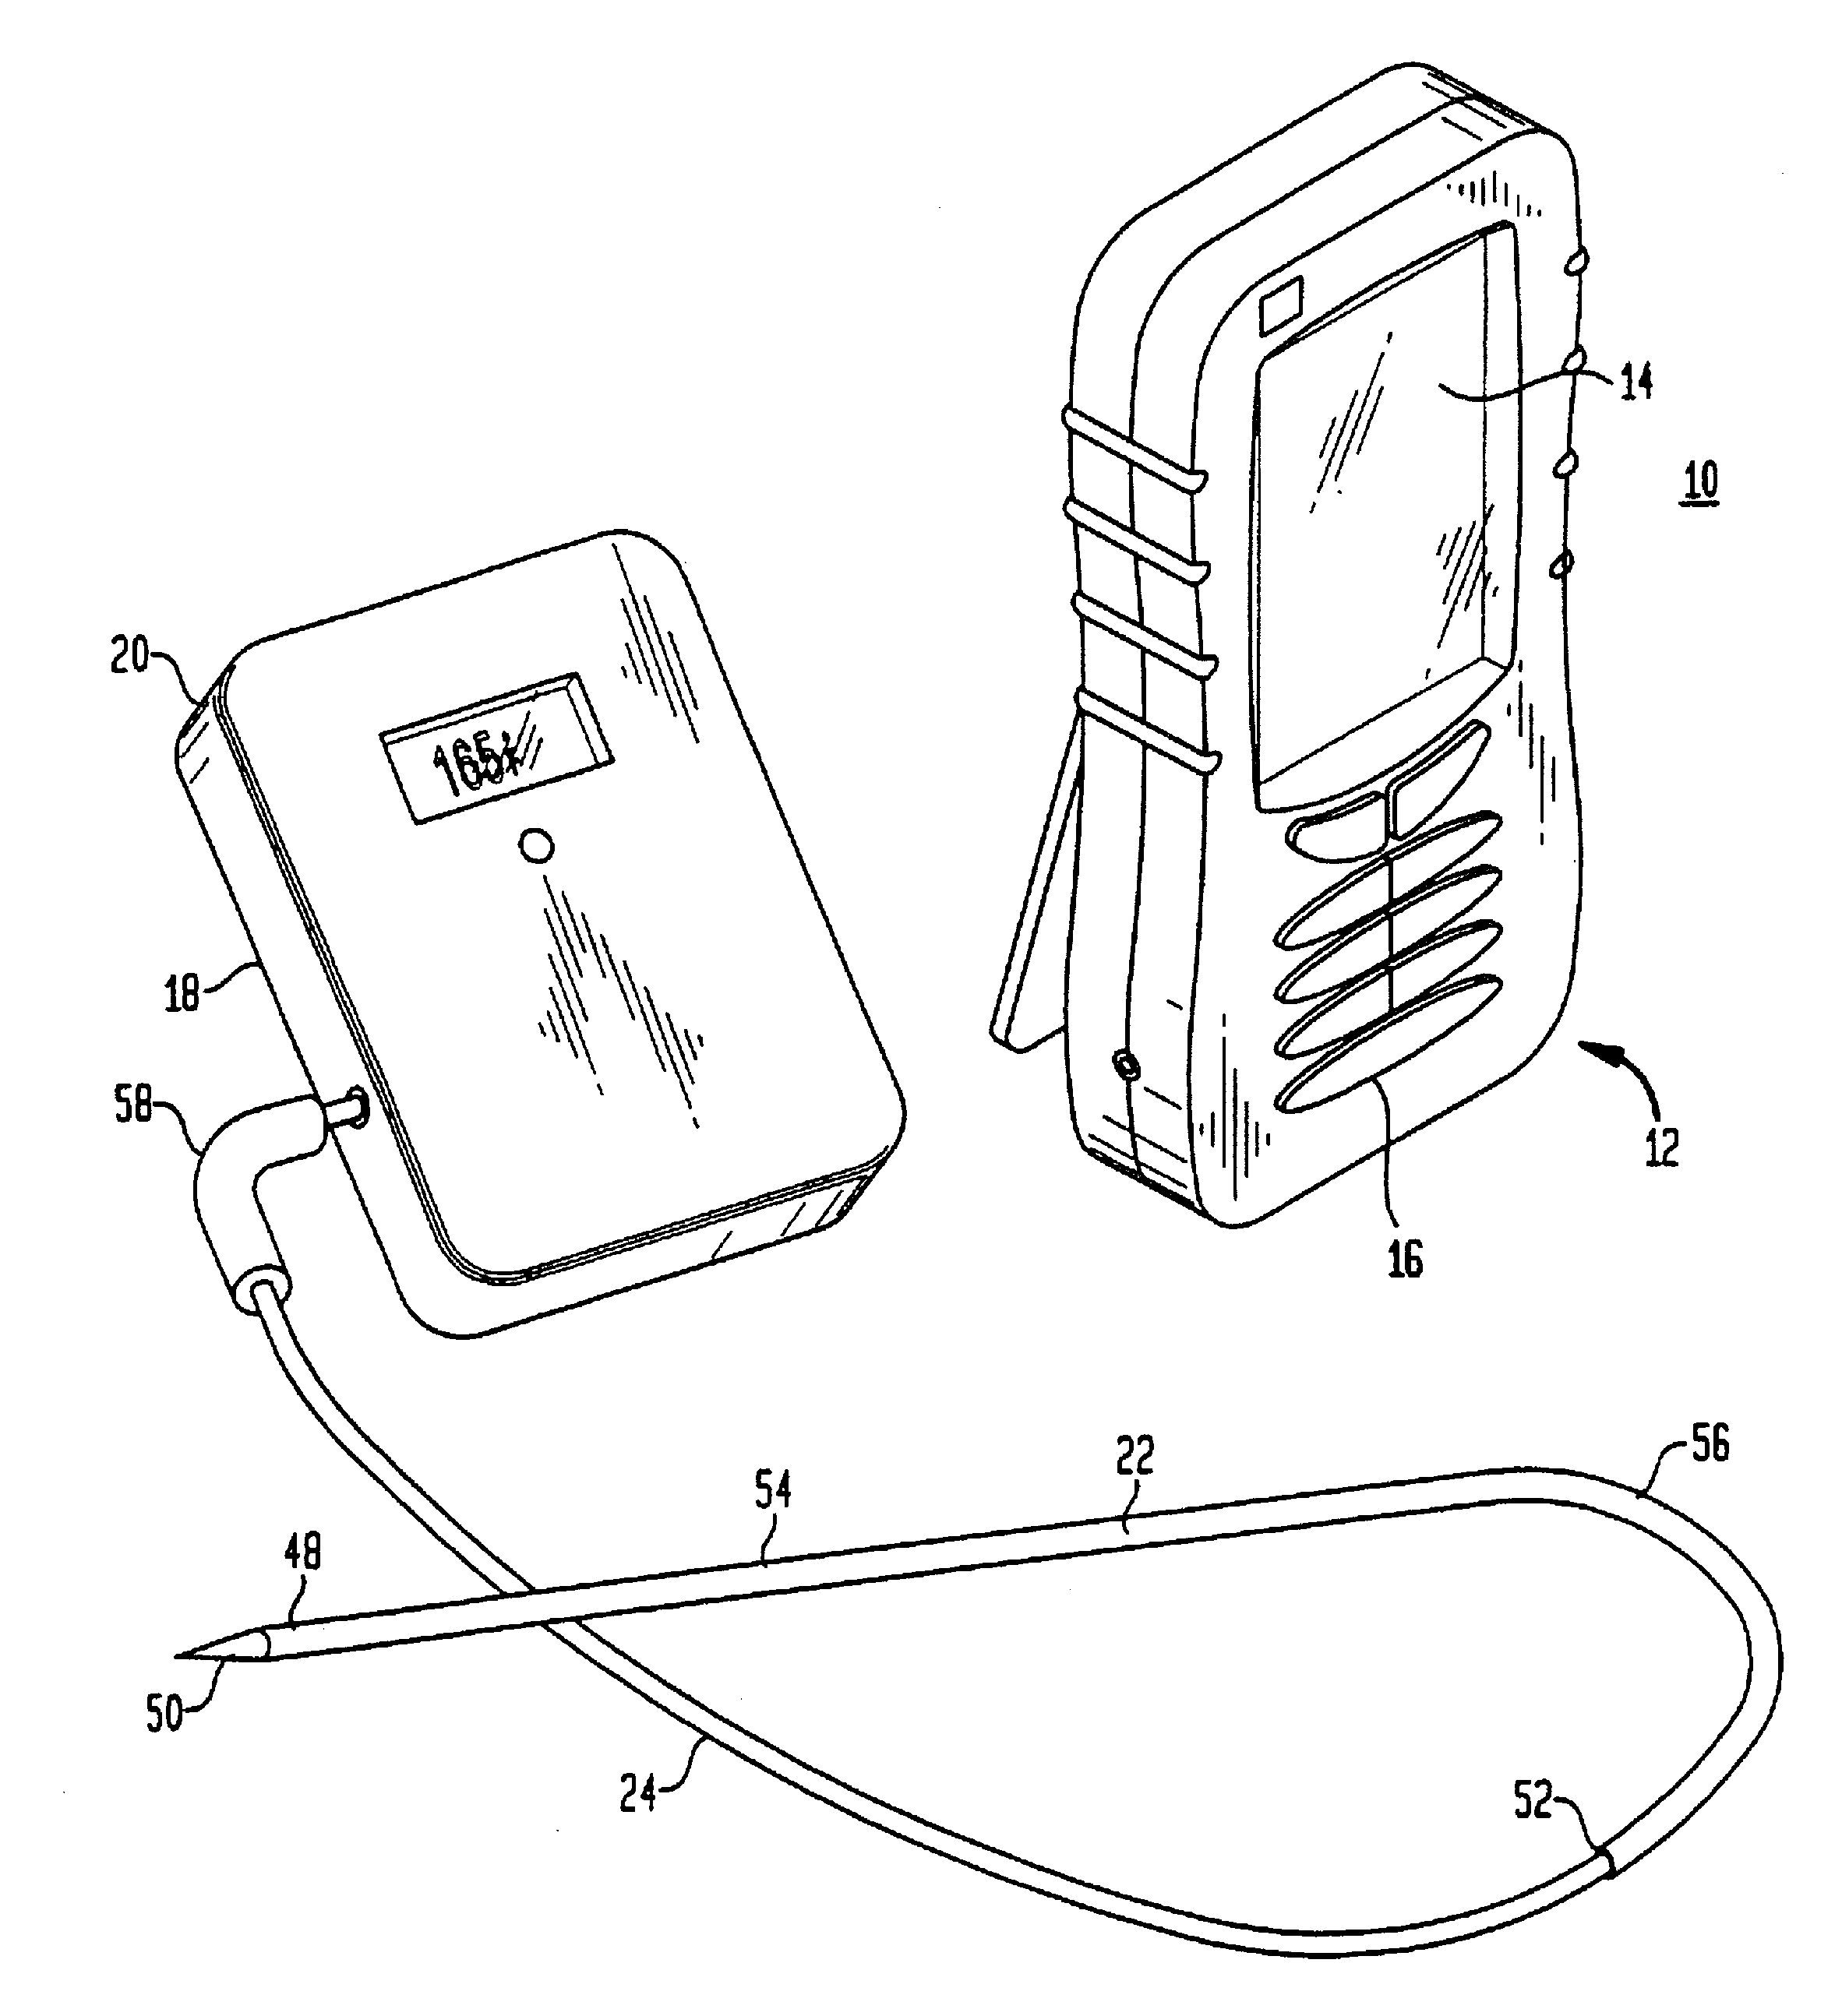 patent illustration for wireless remote cooking thermometer system